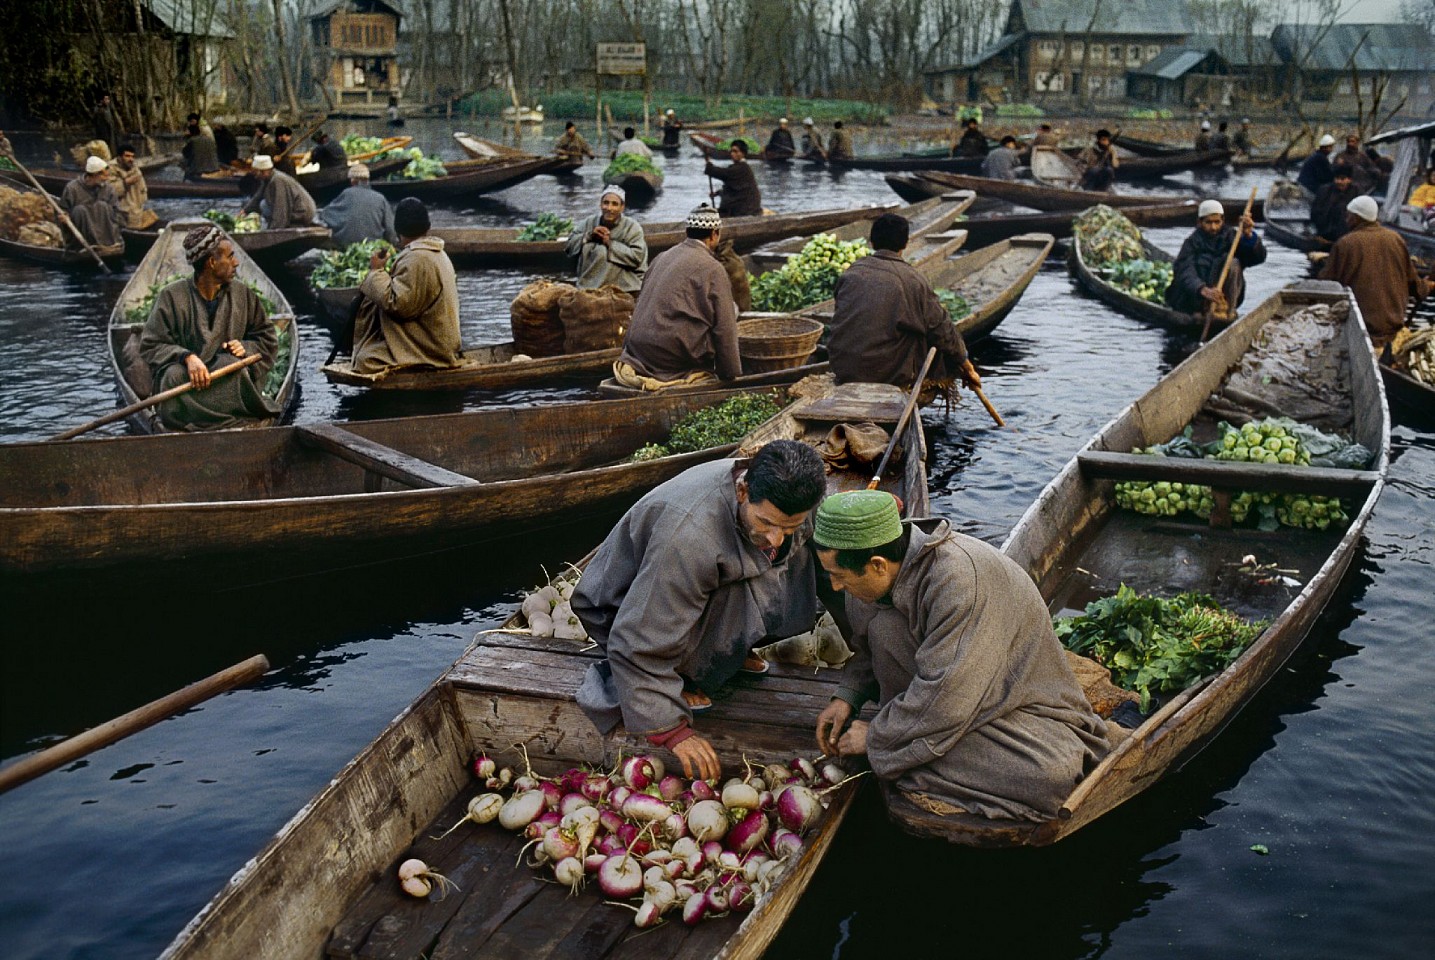 Steve McCurry, Early Morning Vegetable Market, 1998
FujiFlex Crystal Archive Print
Price/Size on request